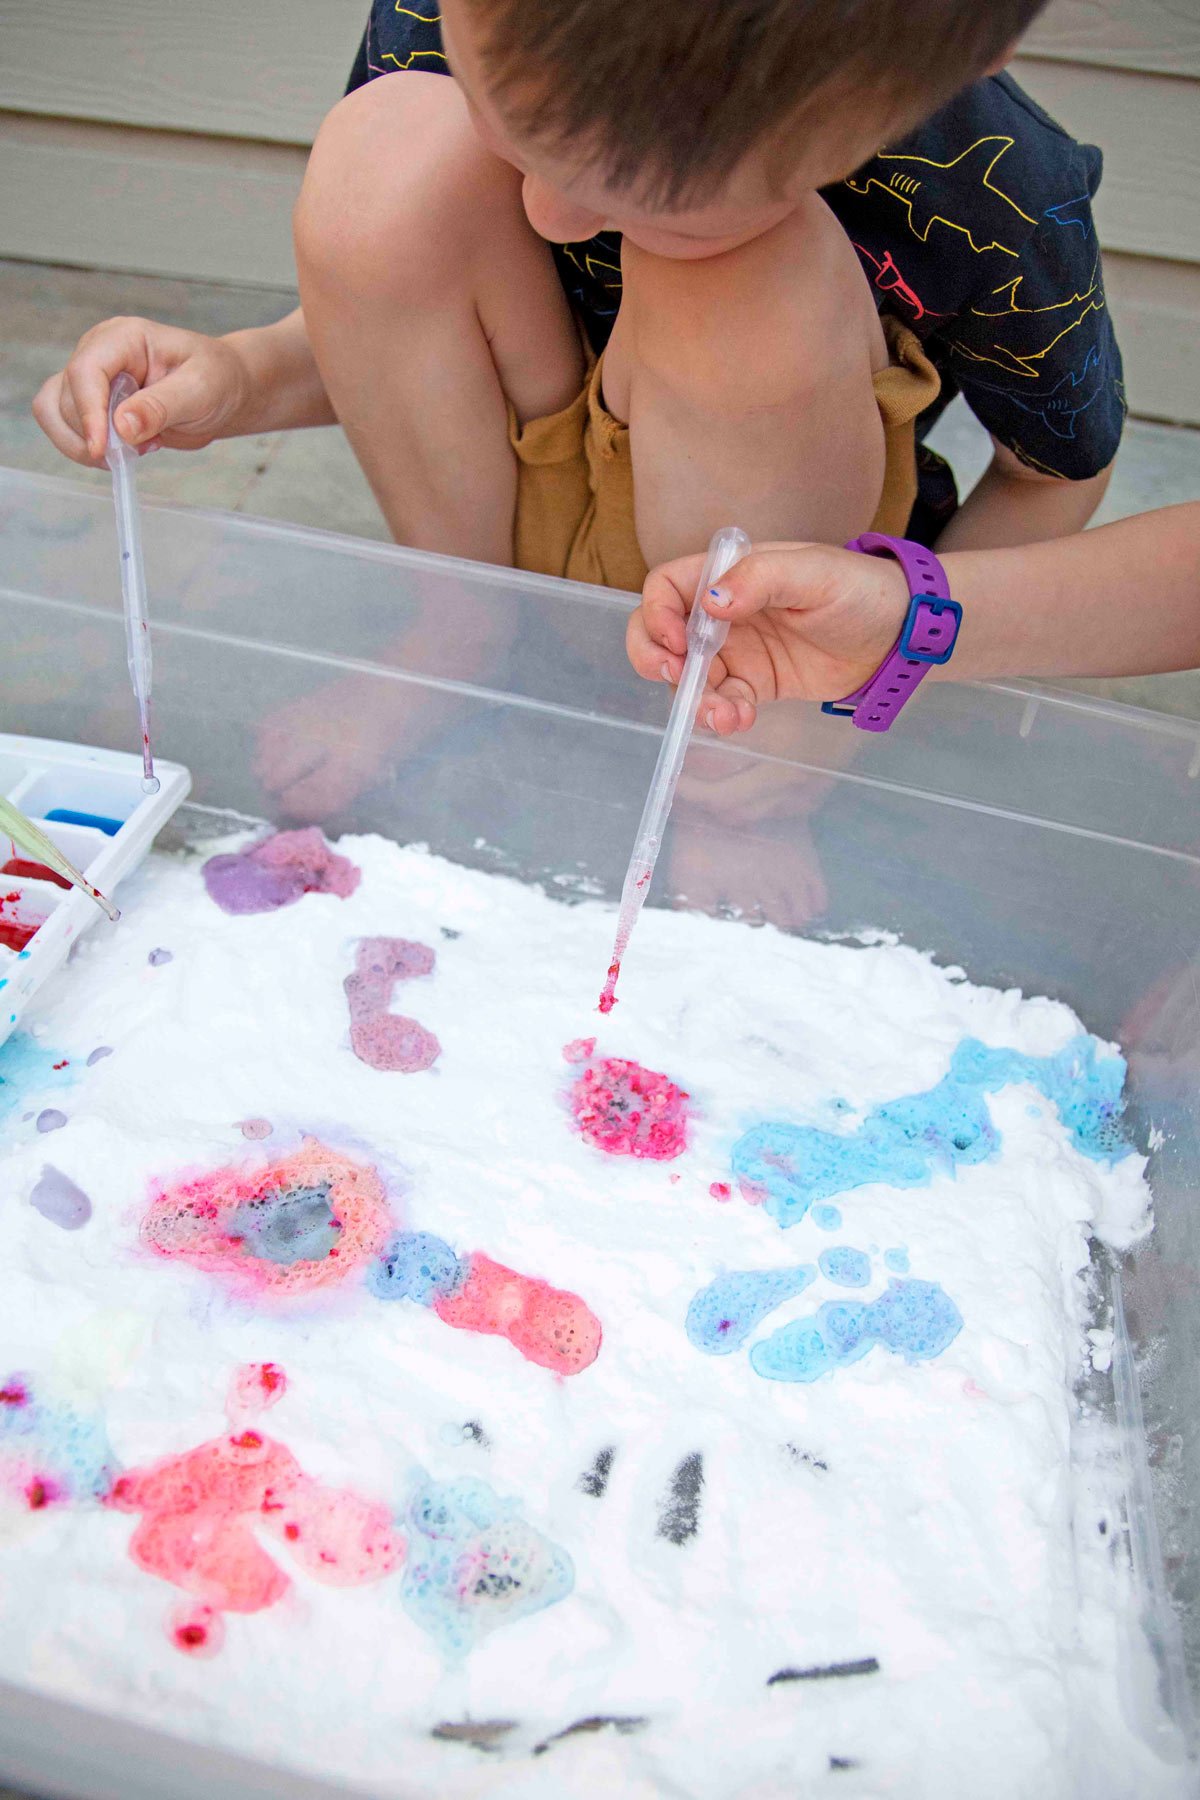 A child's hand holes a pipette and squeezes pink vinegar into a bin of baking soda.